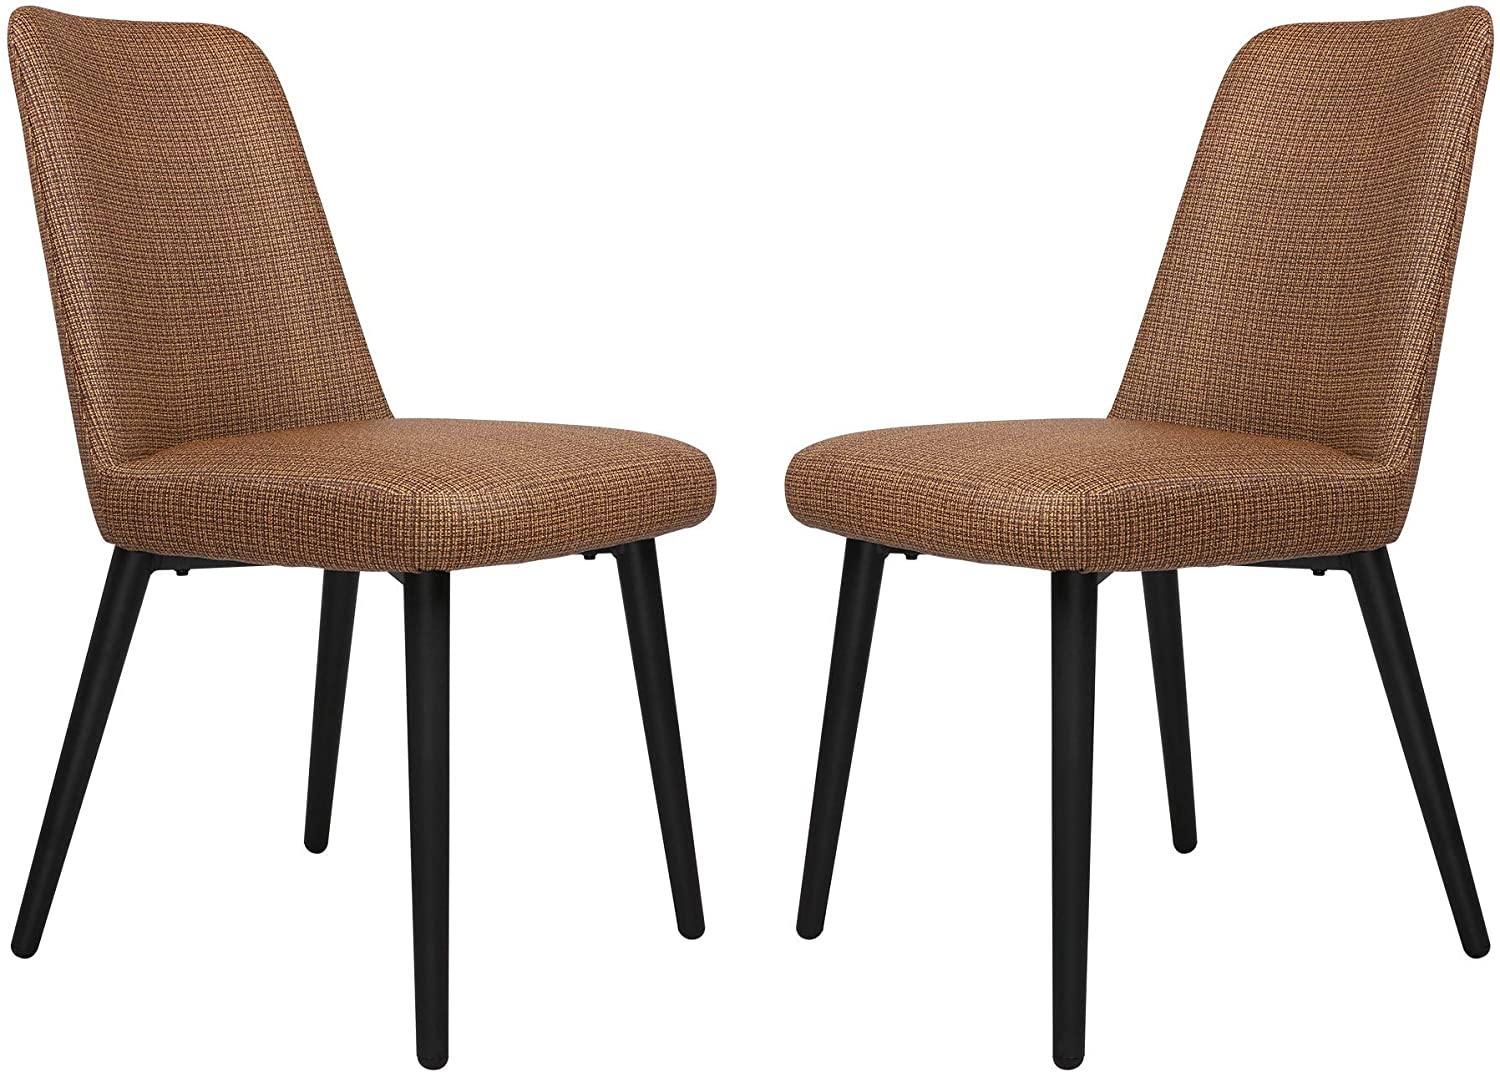 Modern Accent Chairs Set of 2 with Upholstered Seat and Back, Water Resistance and Easy to Clean, Durable Restaurant Chair - Bosonshop